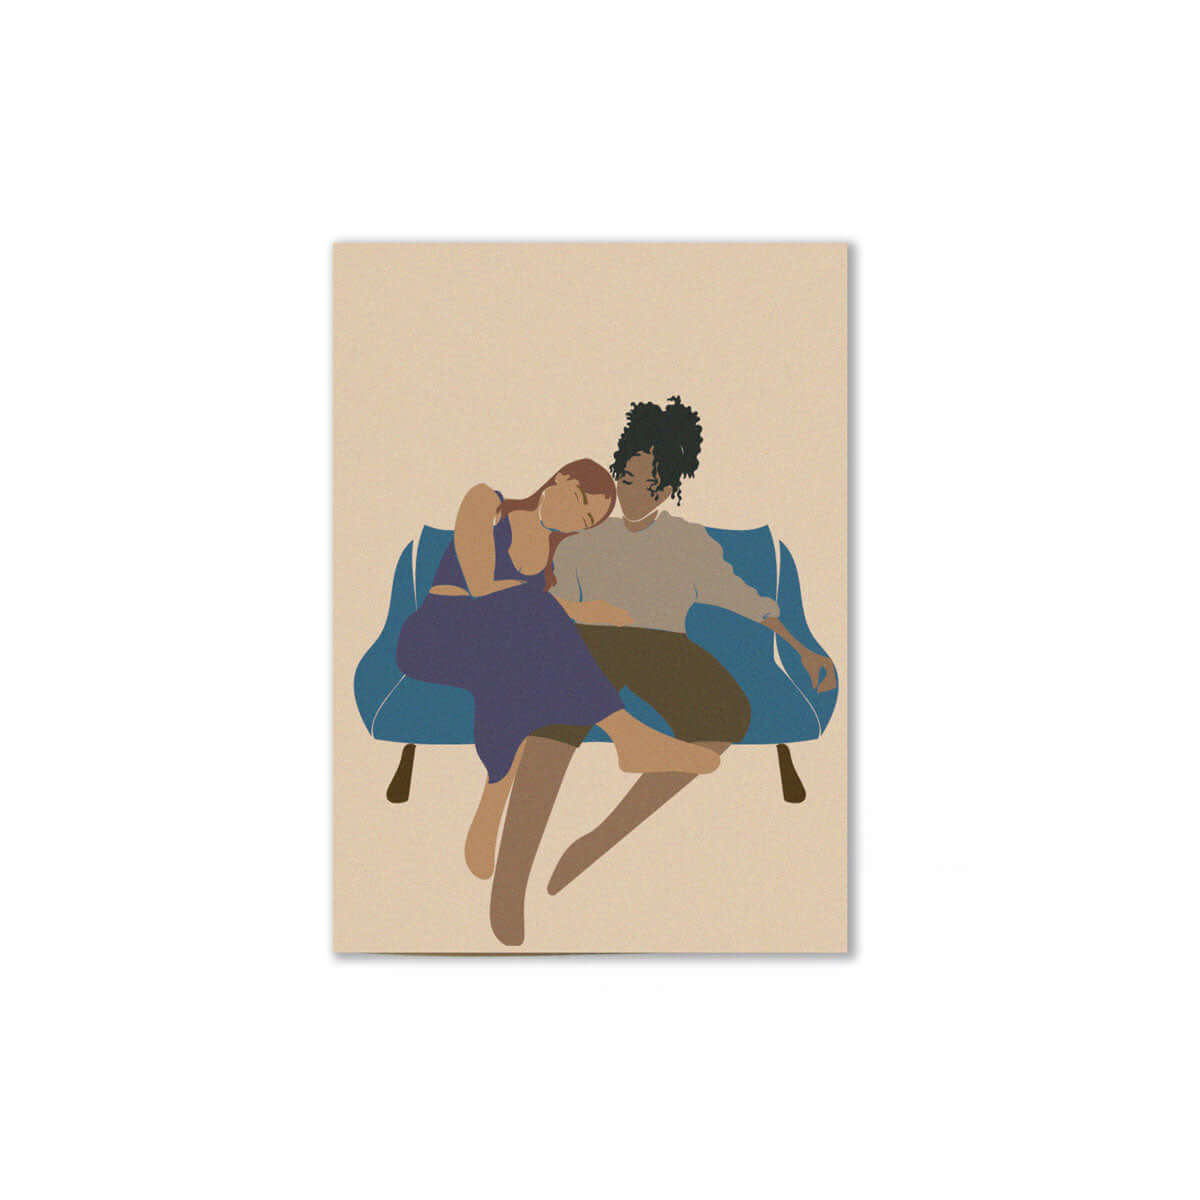 kinfolk card number 6 which shows an illustration of two femme figures cuddling on a couch.